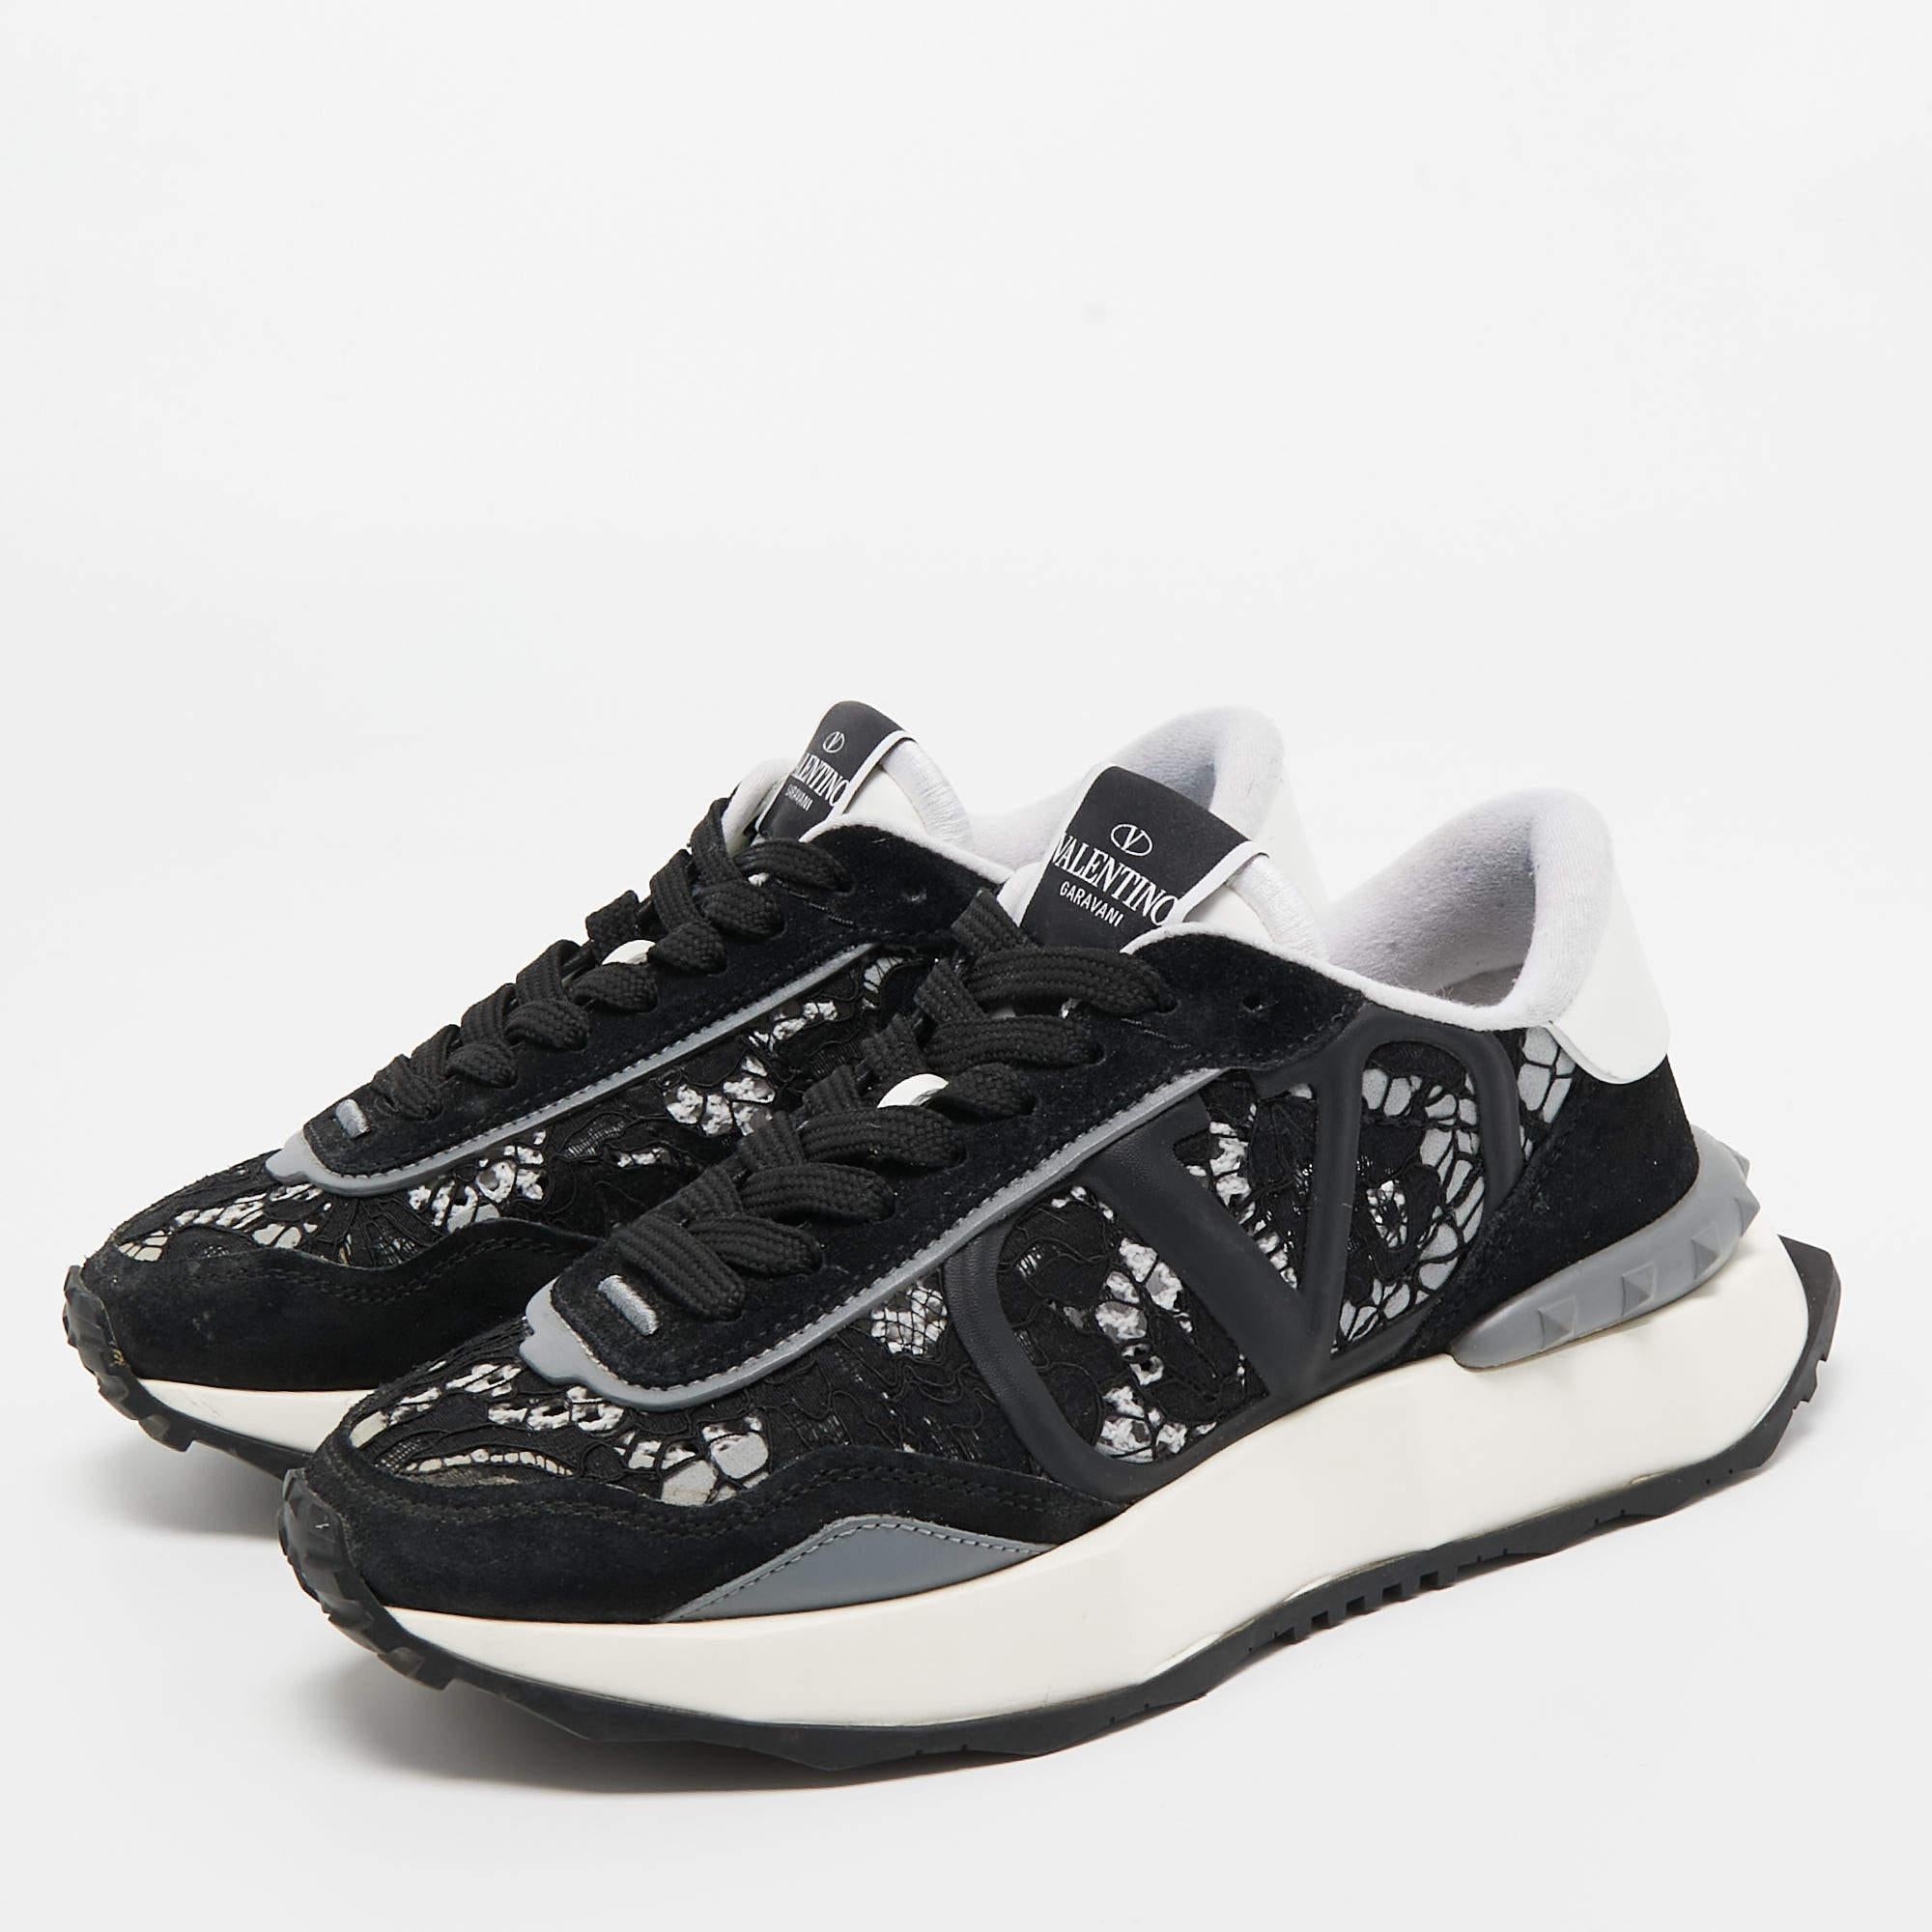 Valentino Black Lace and Suede Lacerunner Sneakers Size 36 In Good Condition For Sale In Dubai, Al Qouz 2